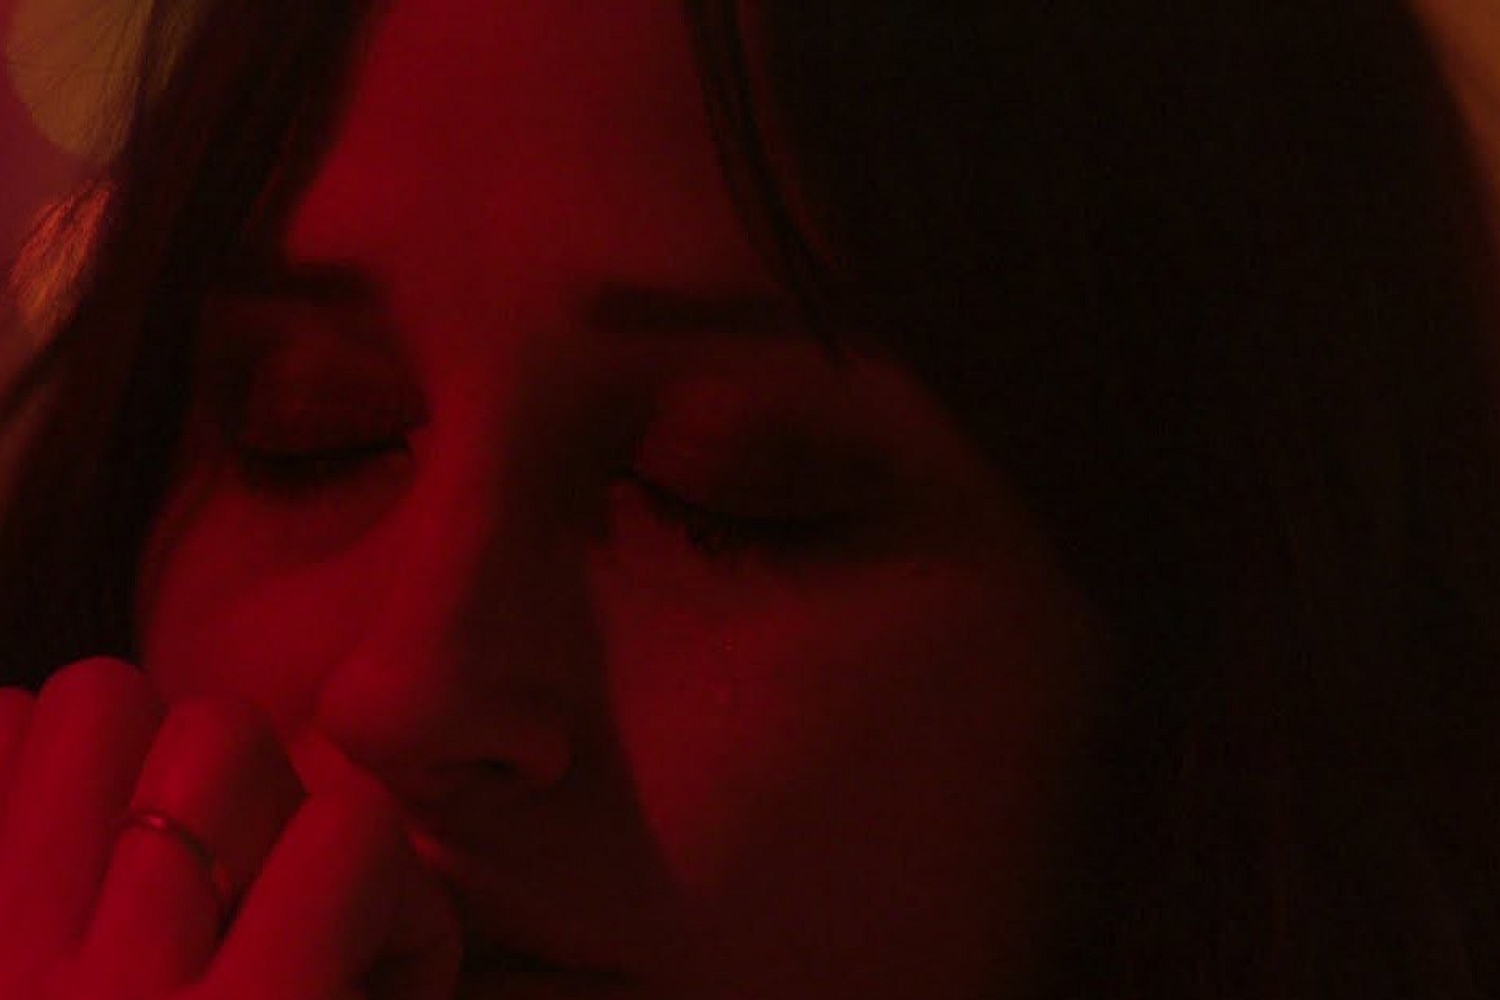 TT (Theresa Wayman of Warpaint) shares new single and video ‘I’ve Been Fine’